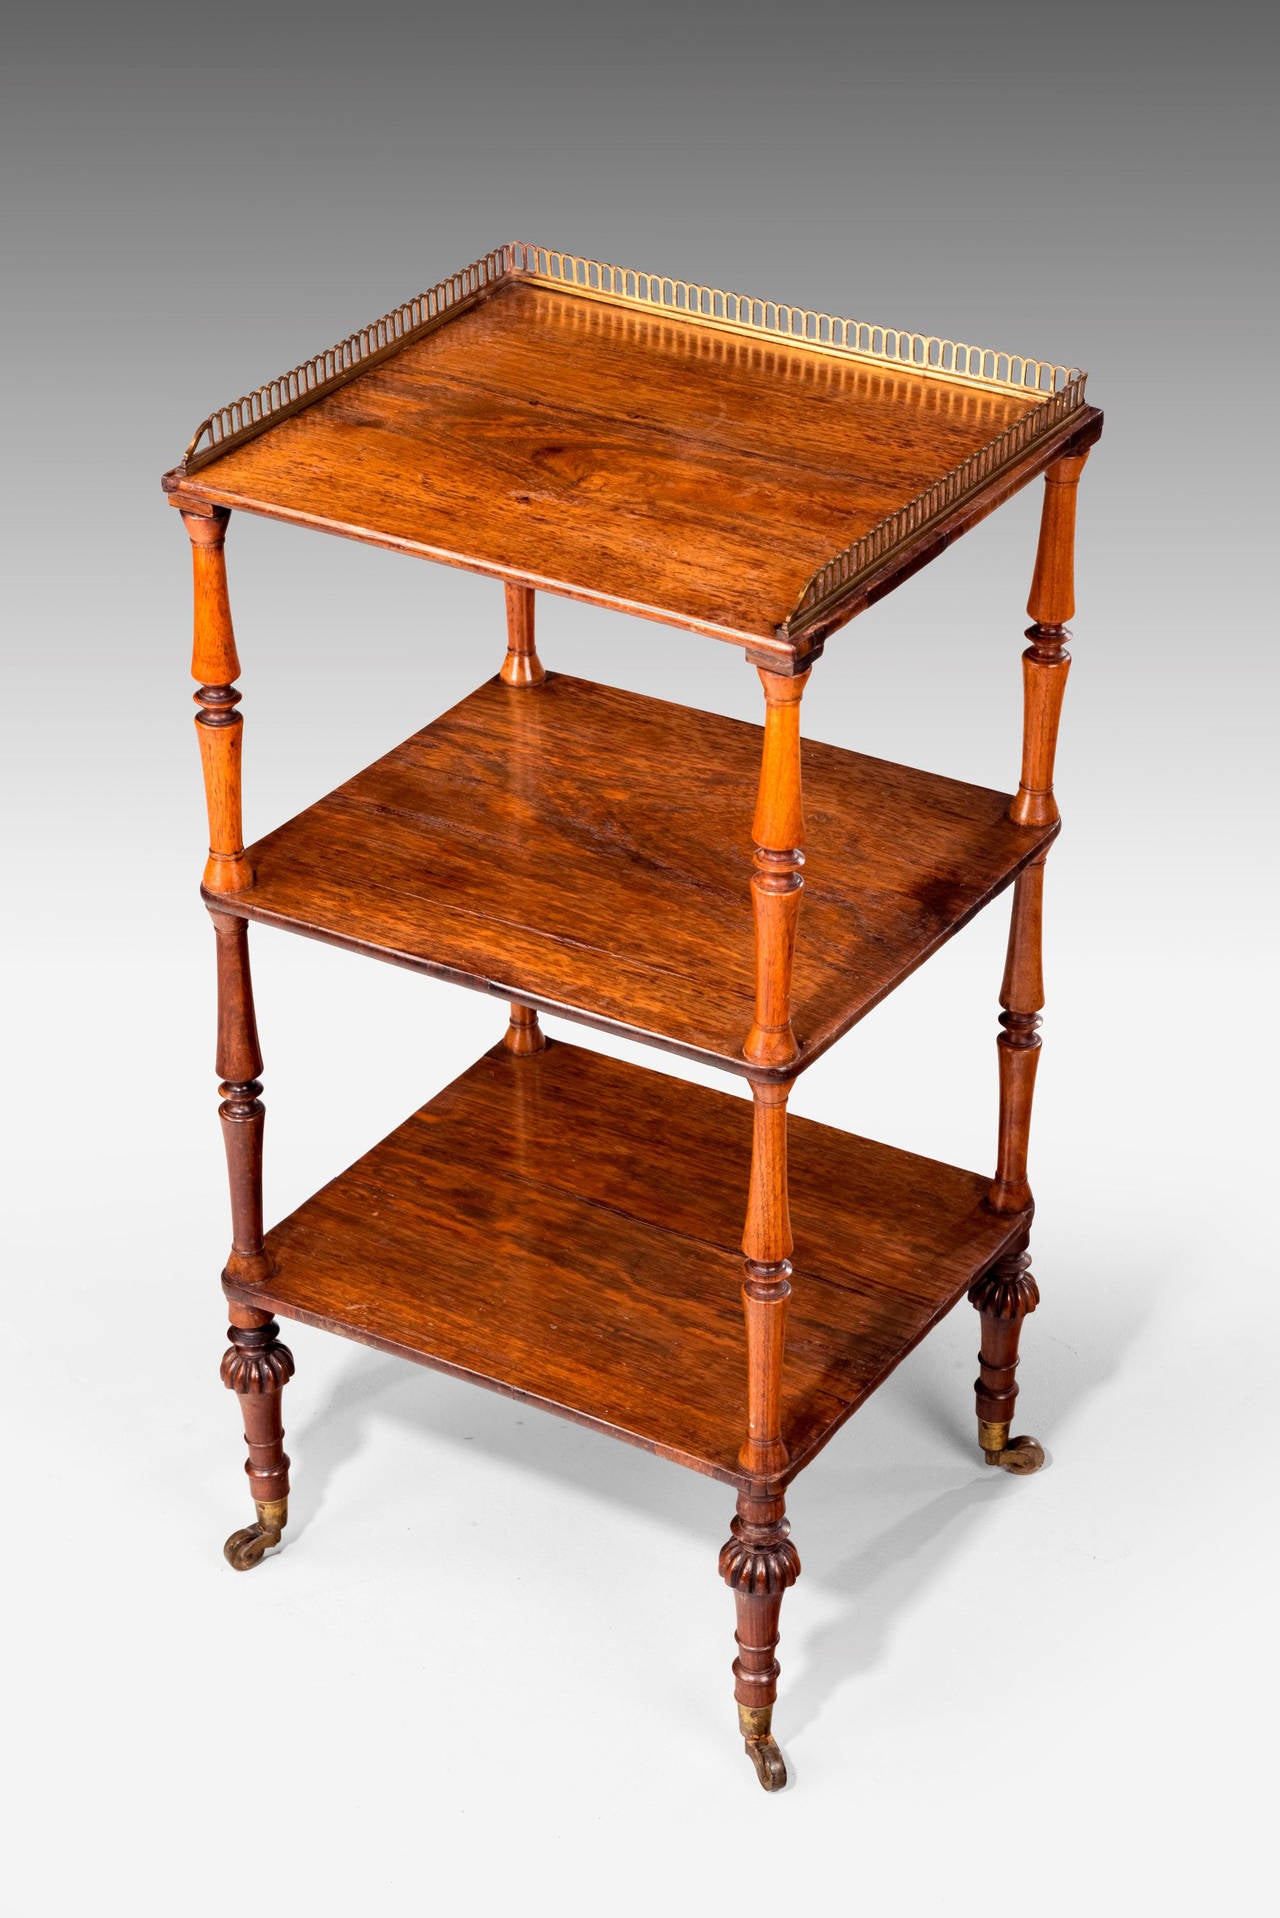 An elegant Regency period etagere. Retaining original border to the top with finely turned supports. Terminating in original shoes and casters.

